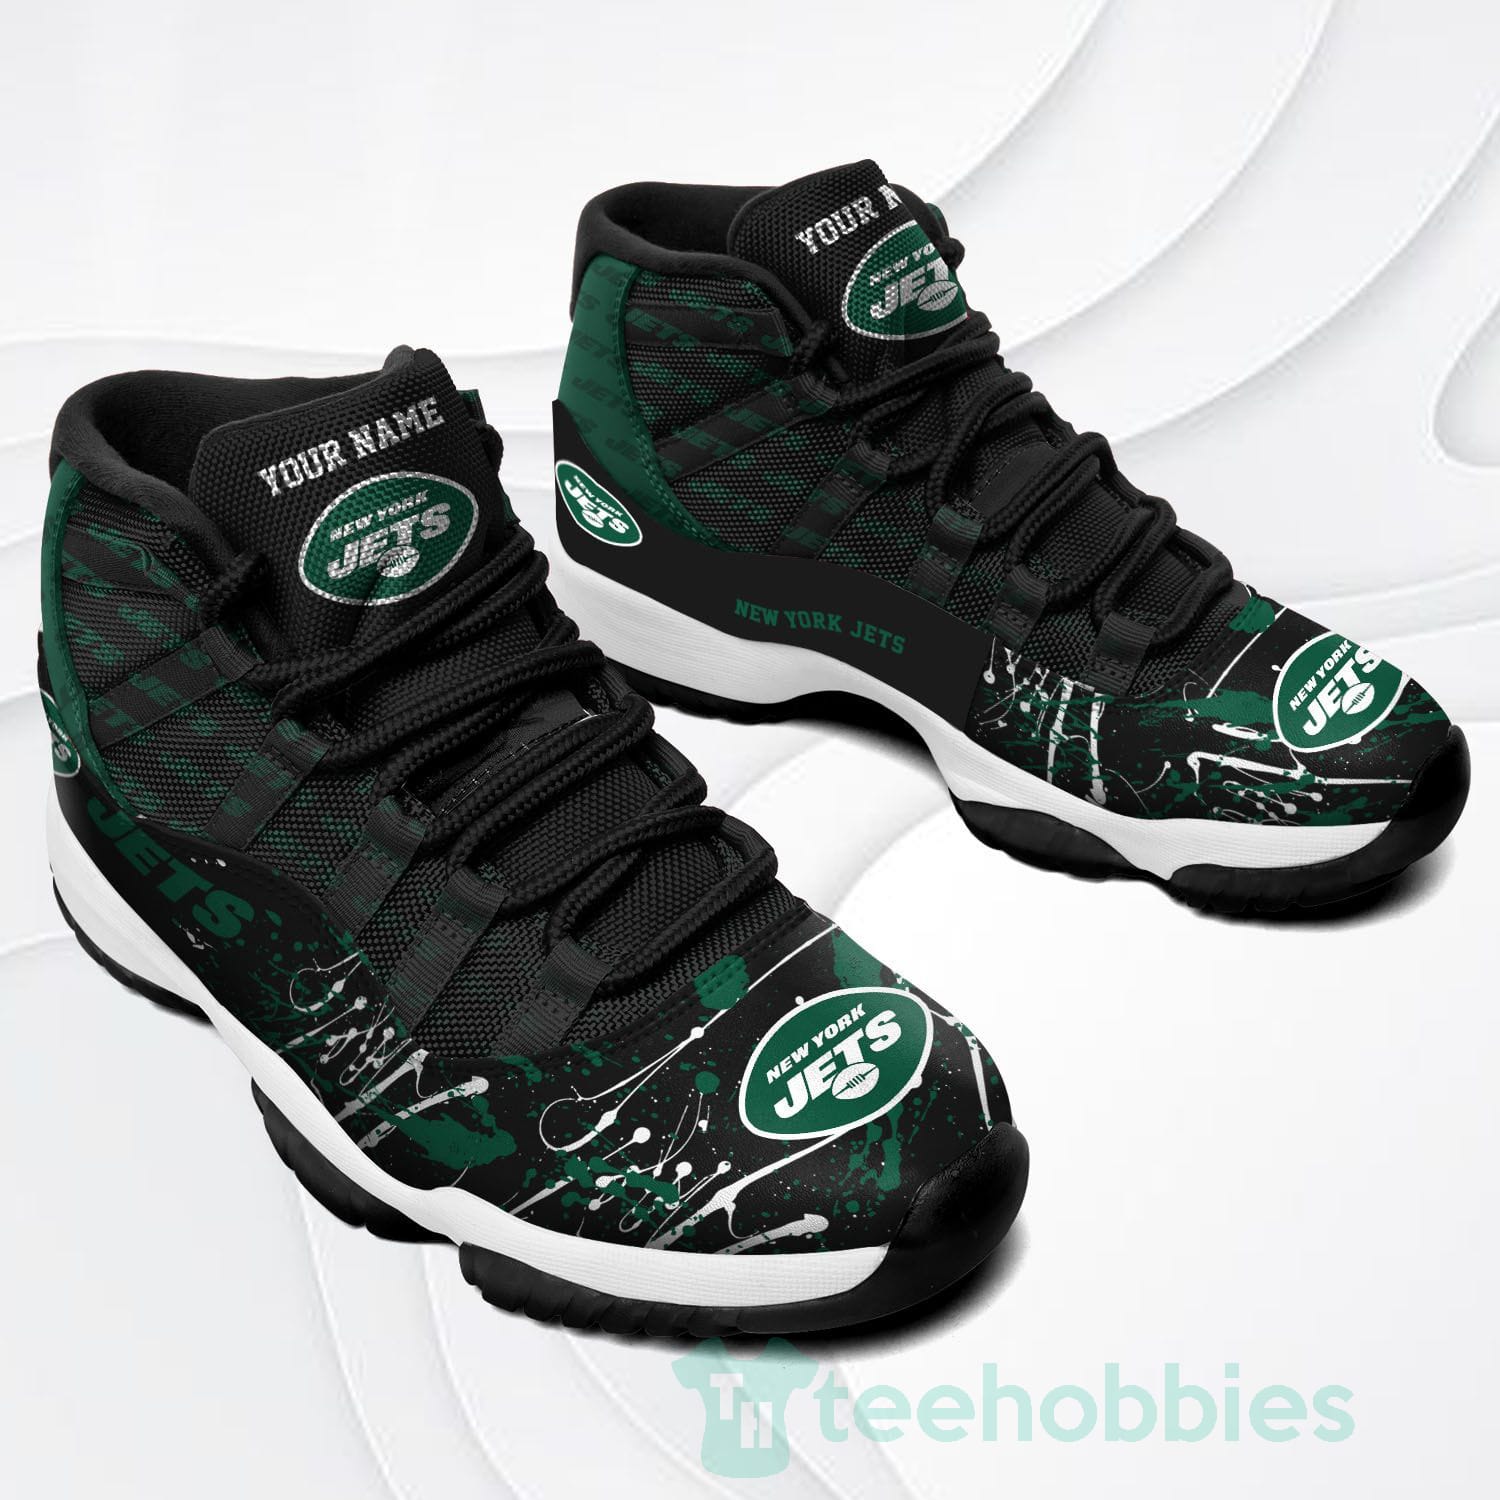 New York Jets Customized New Air Jordan 11 Shoes Product photo 2